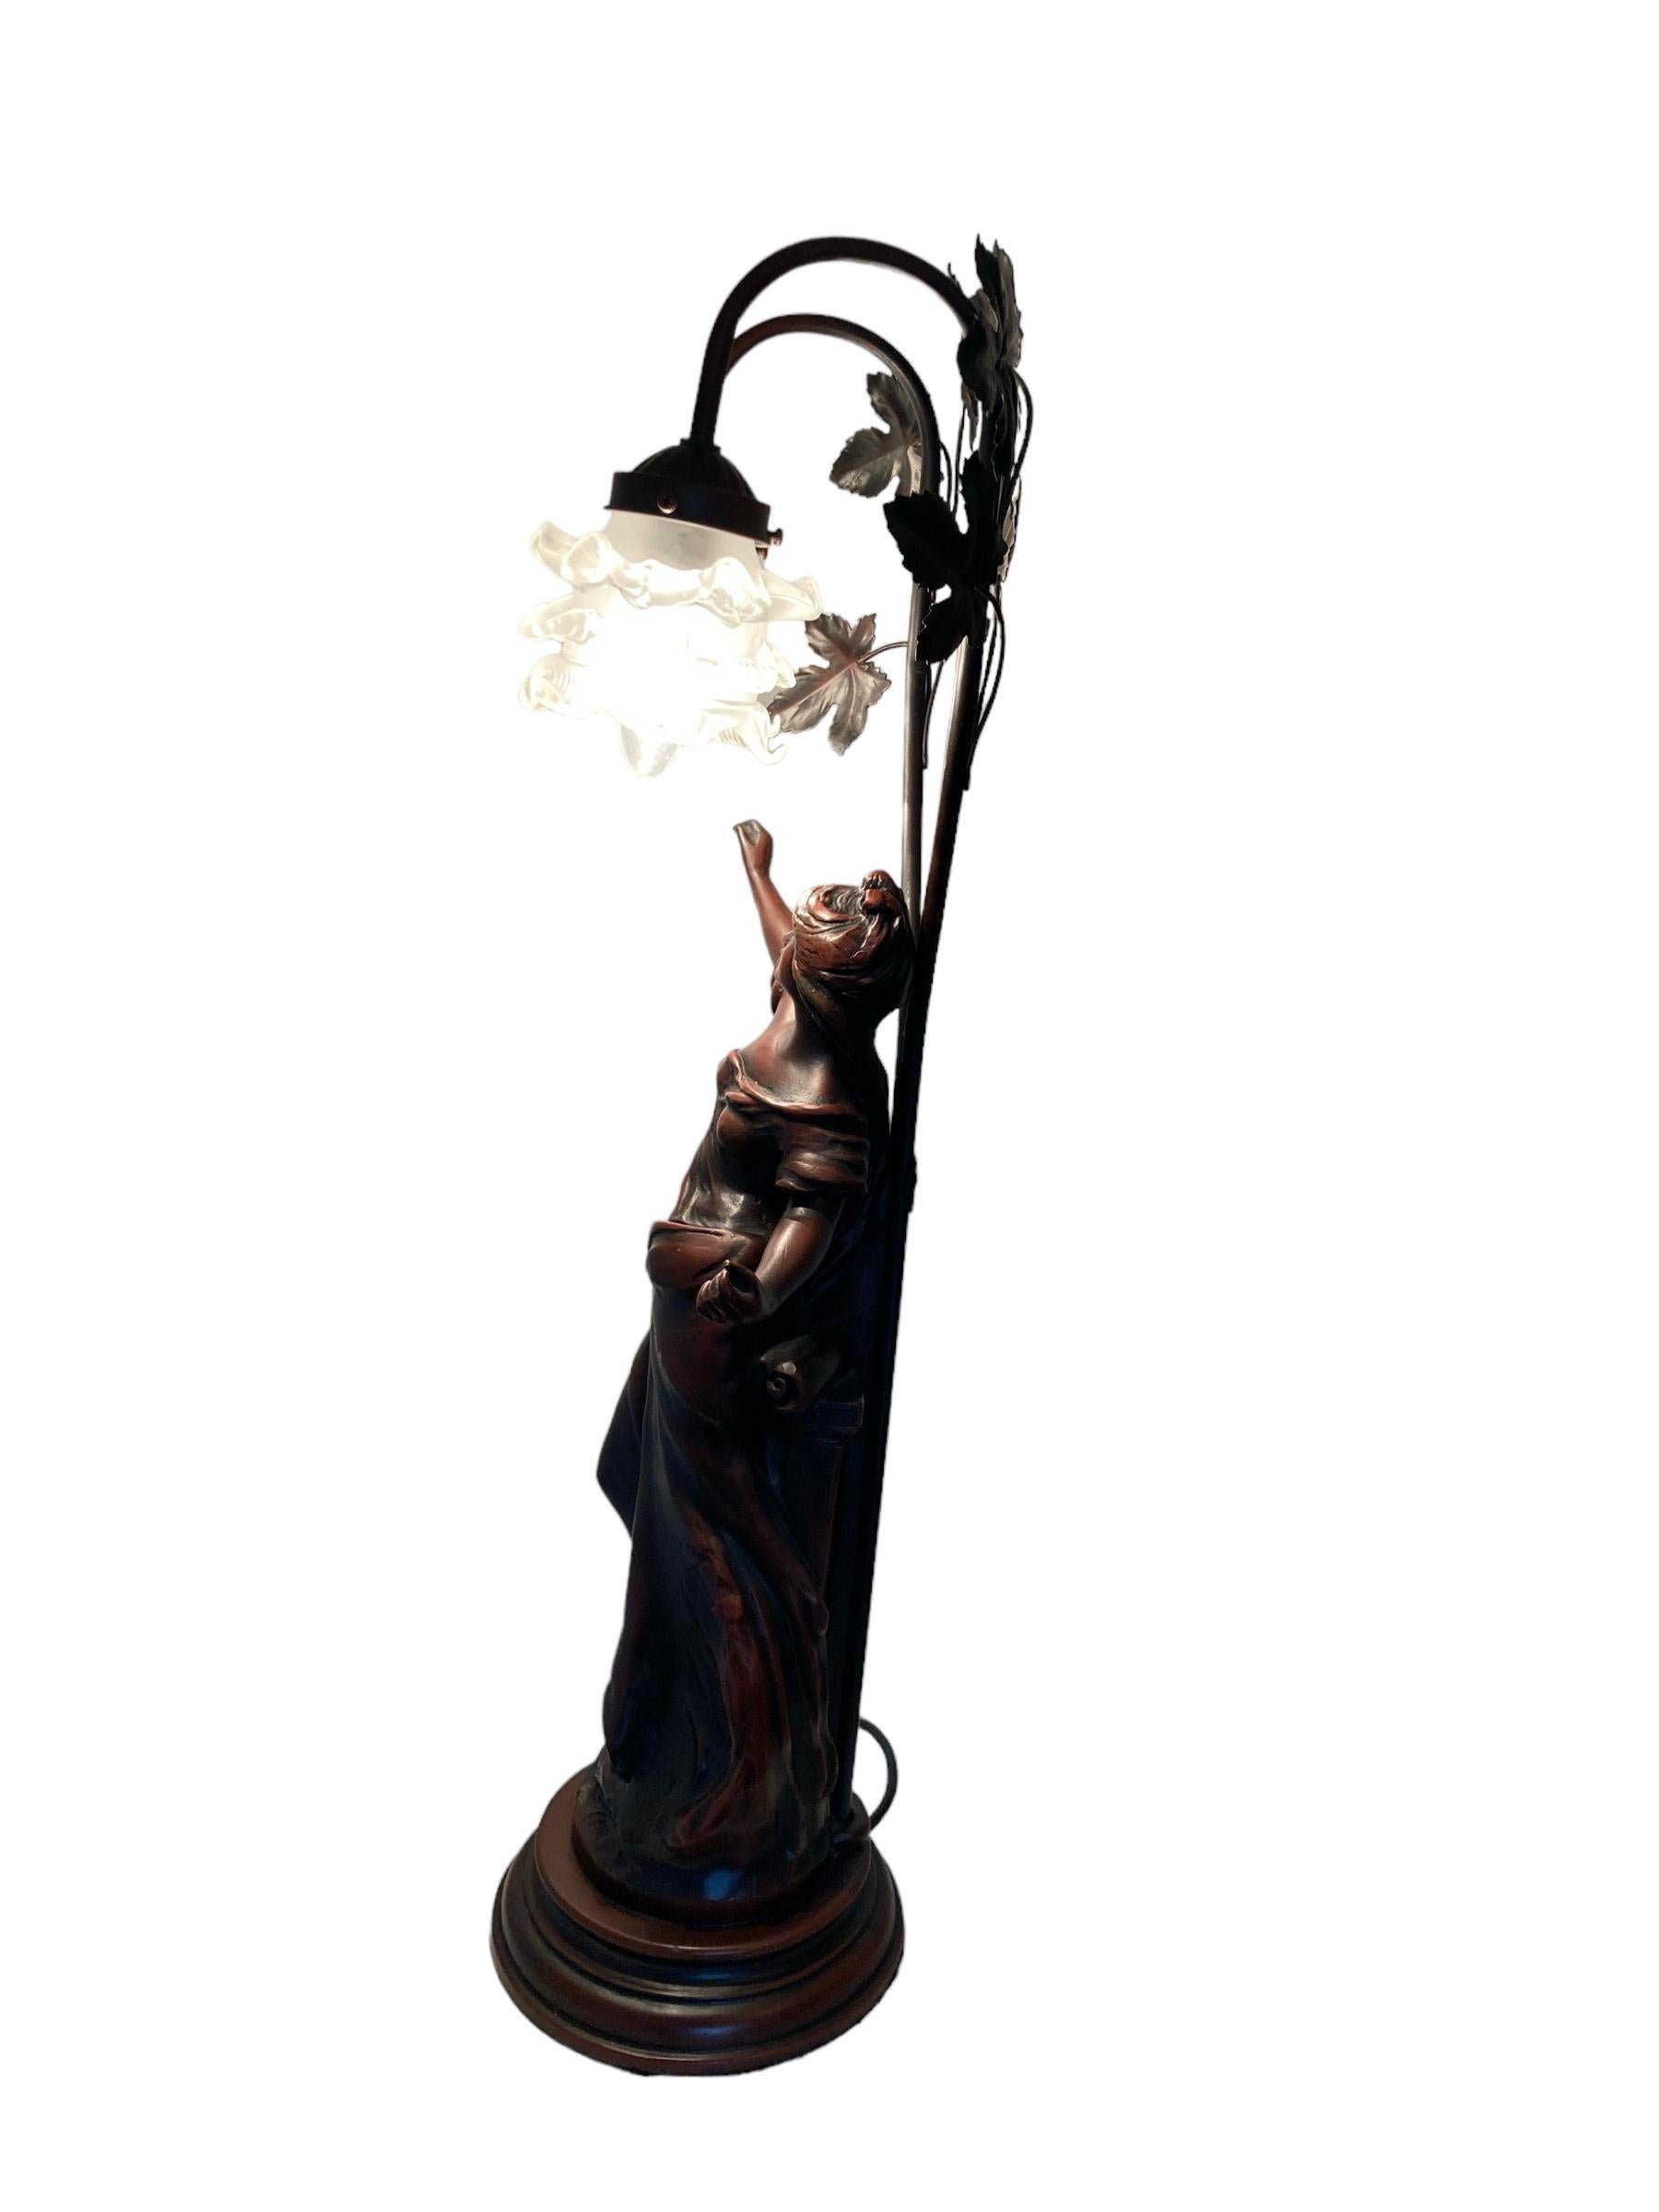 British Vintage Auguste Moreau figural table lamp with glass shades. For Sale